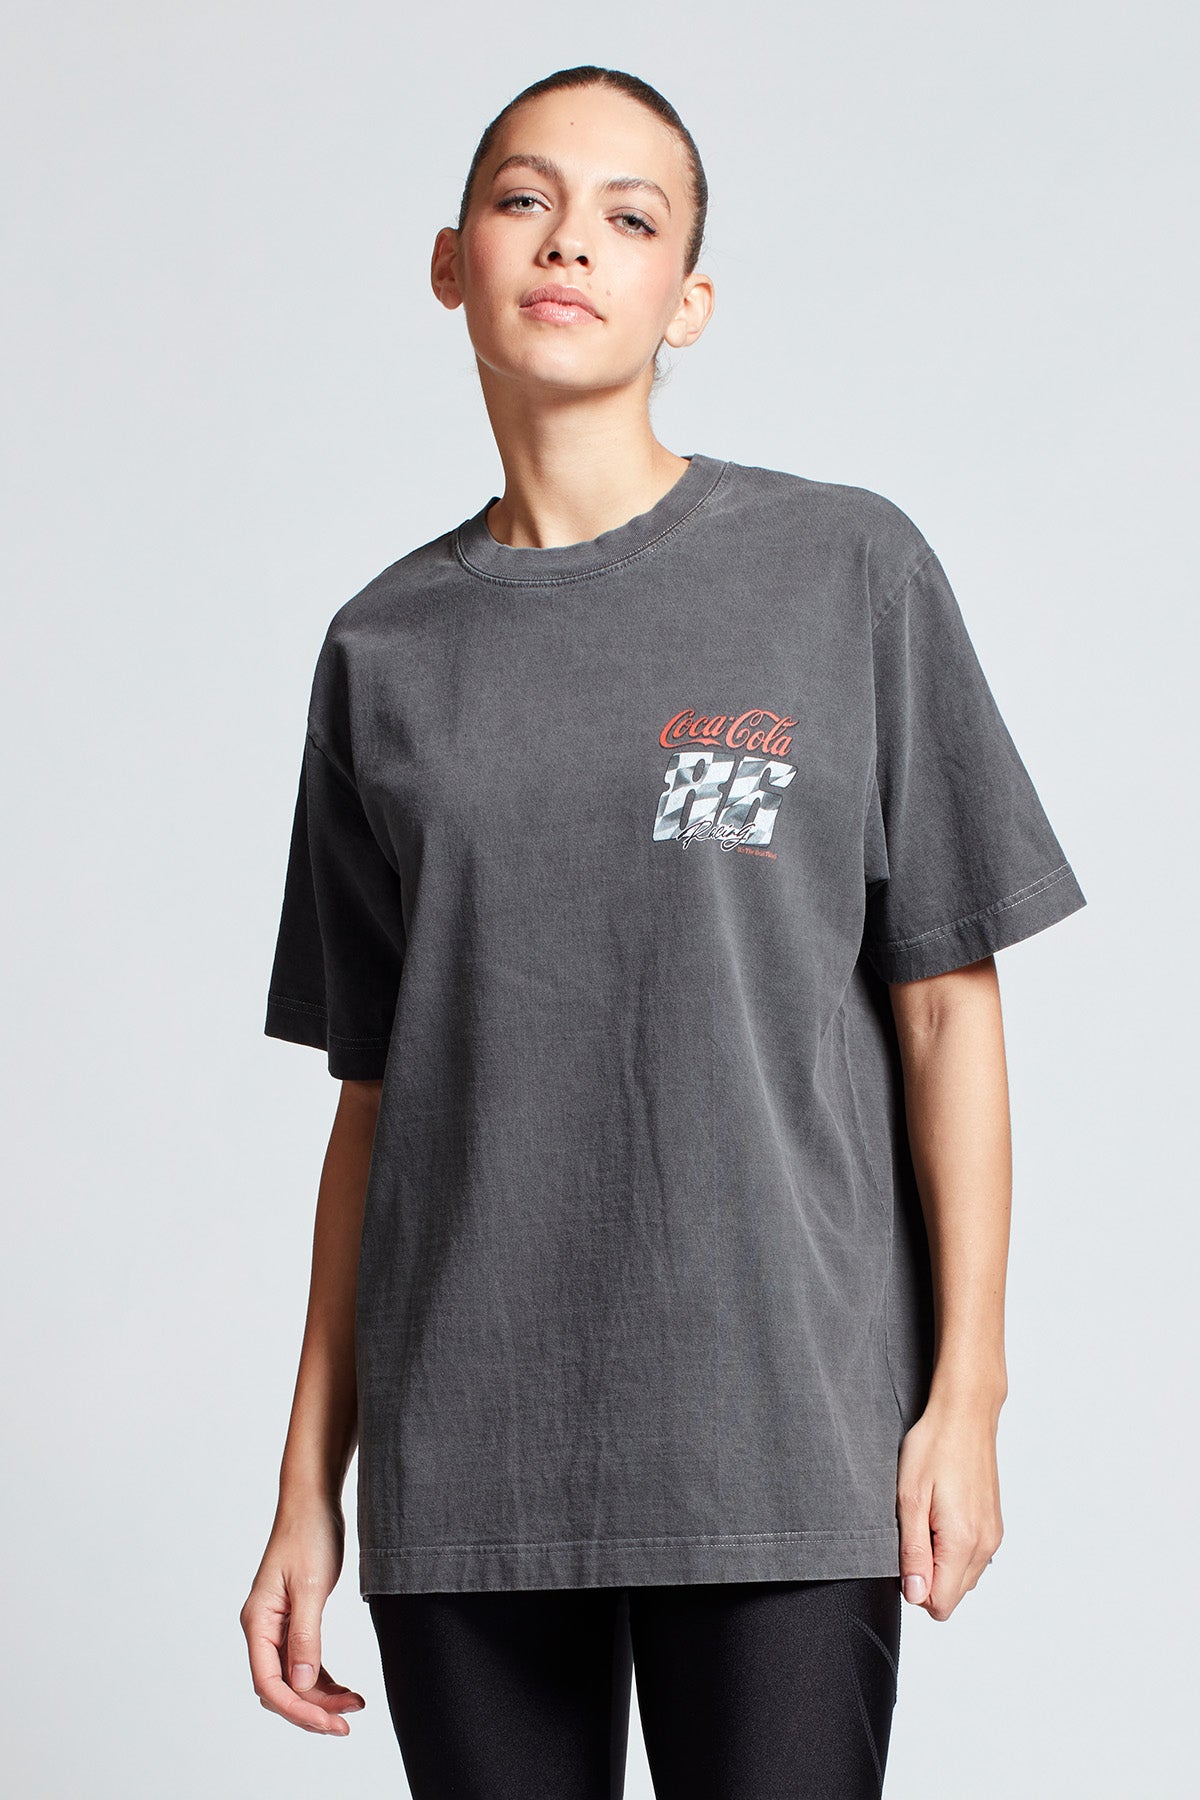 Coca-Cola Lights Out T-shirt in Washed Grey